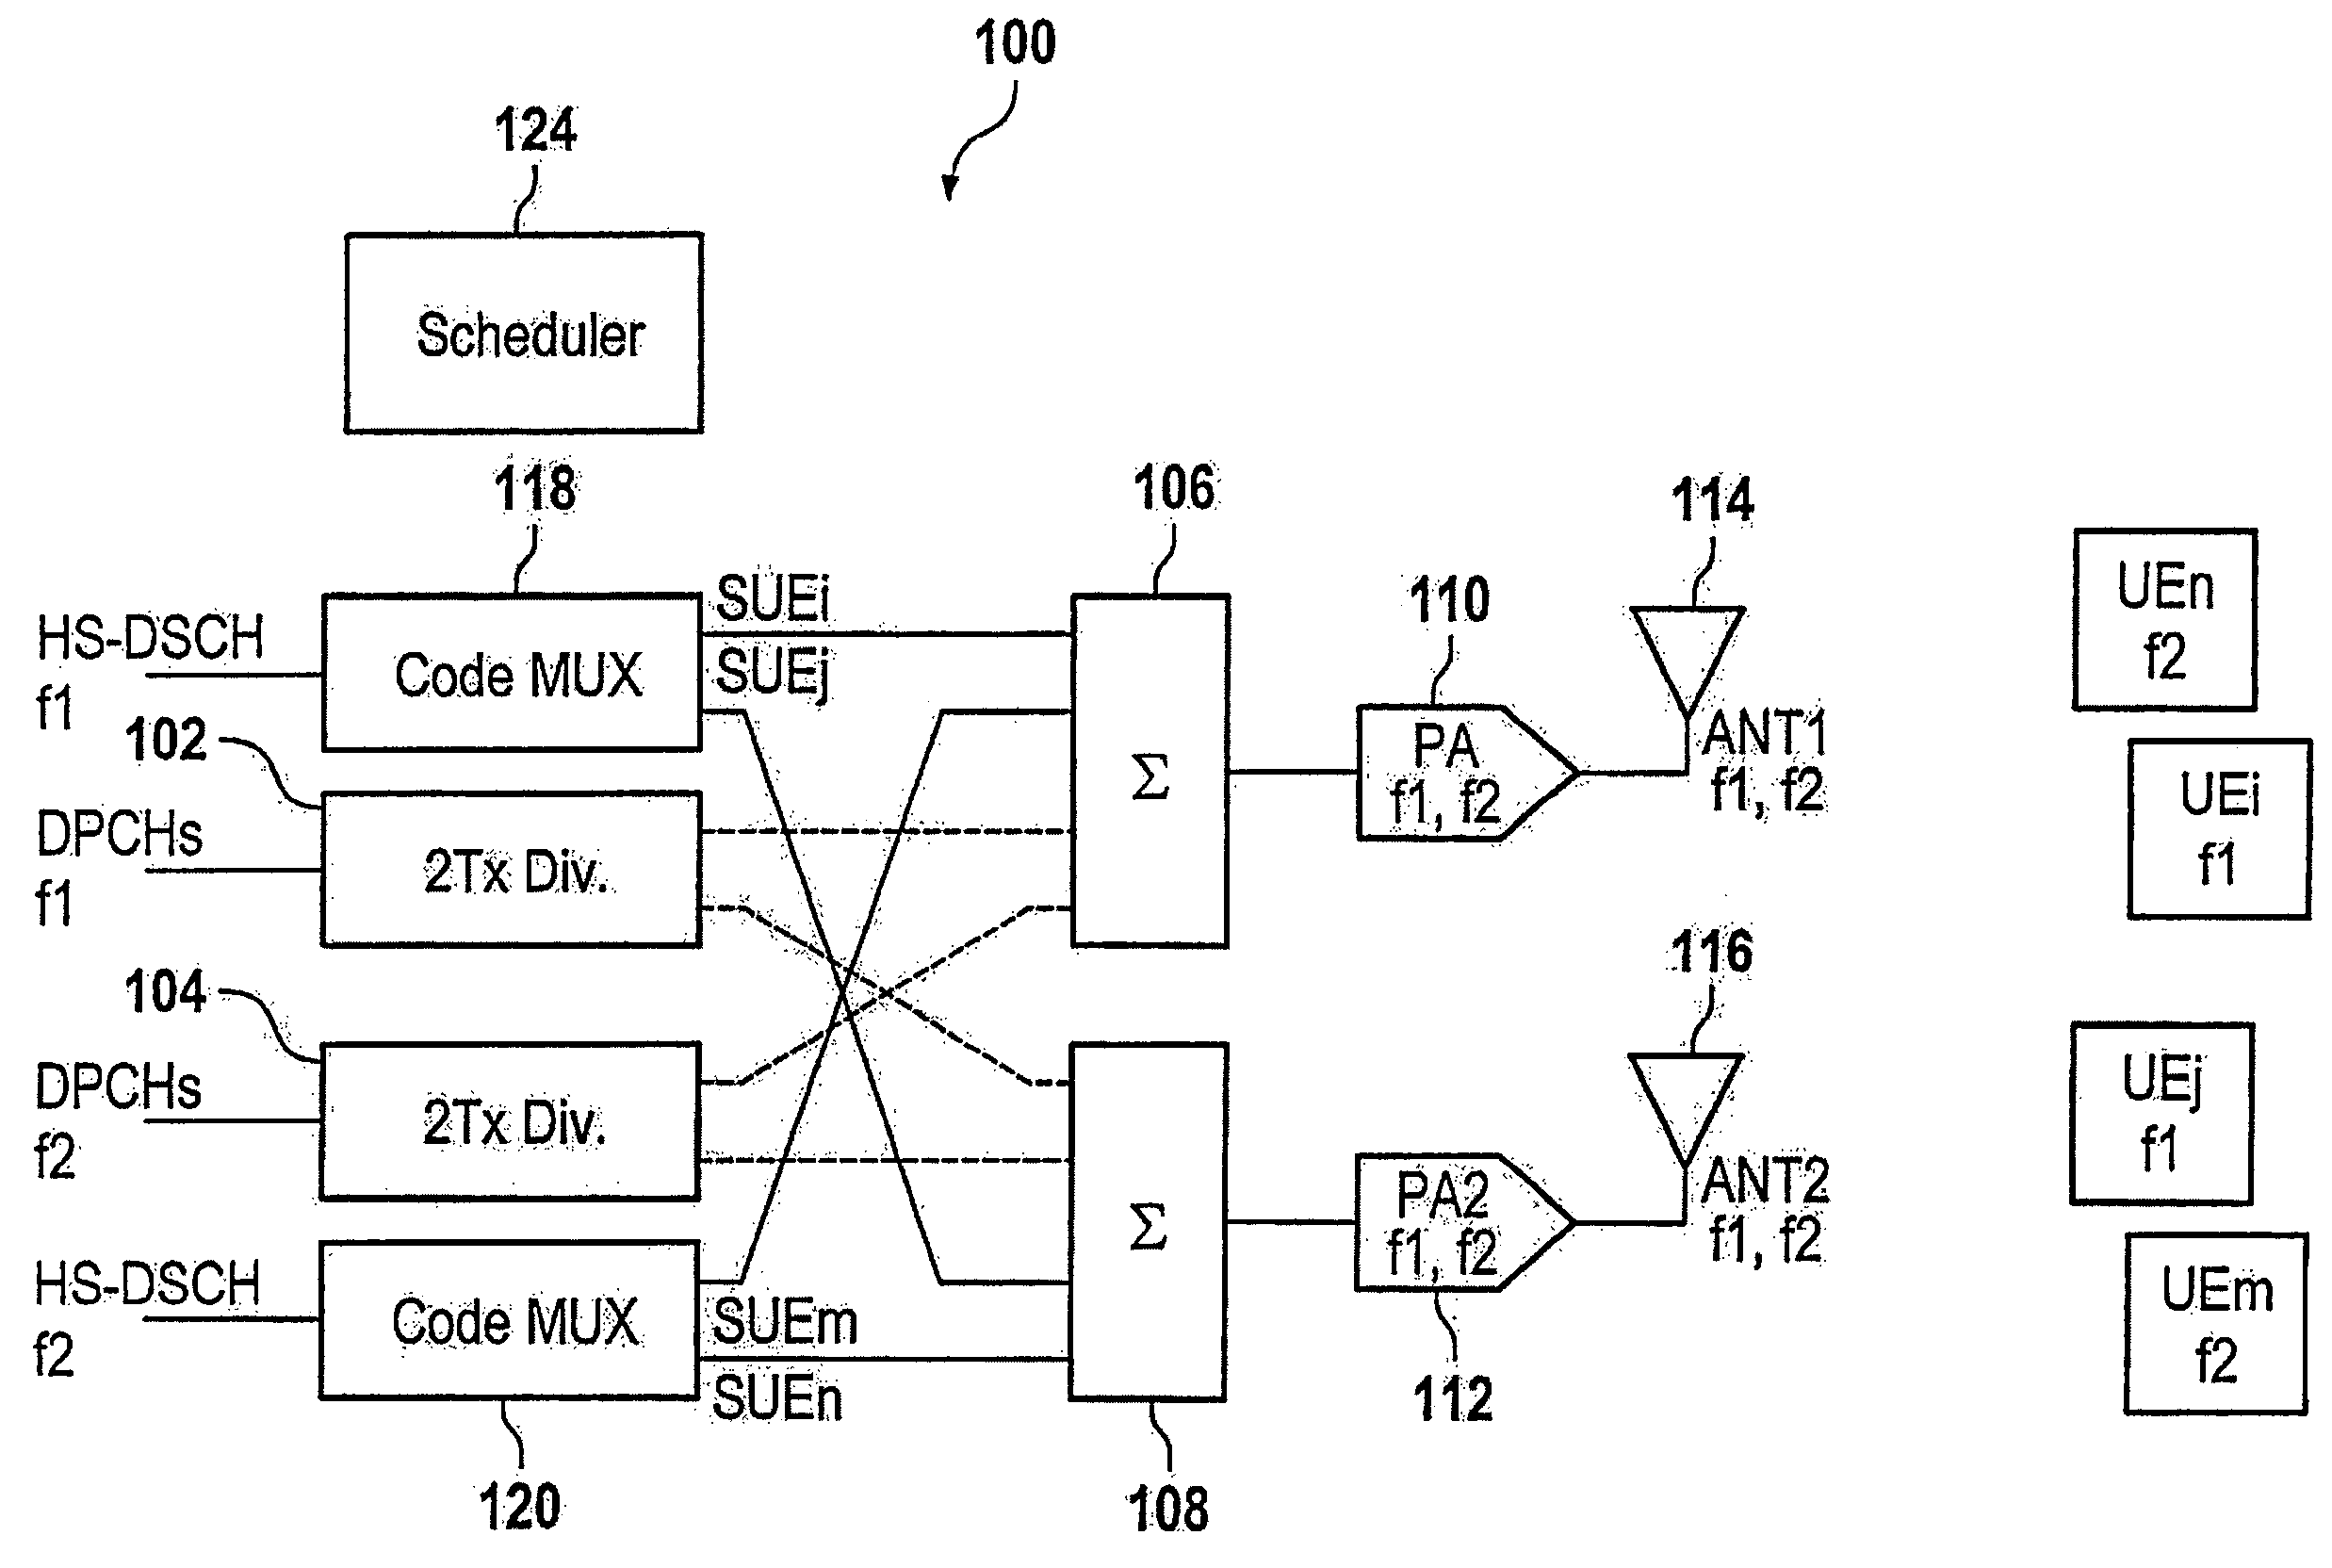 Telecommunication system with transmit and multi-user diversity